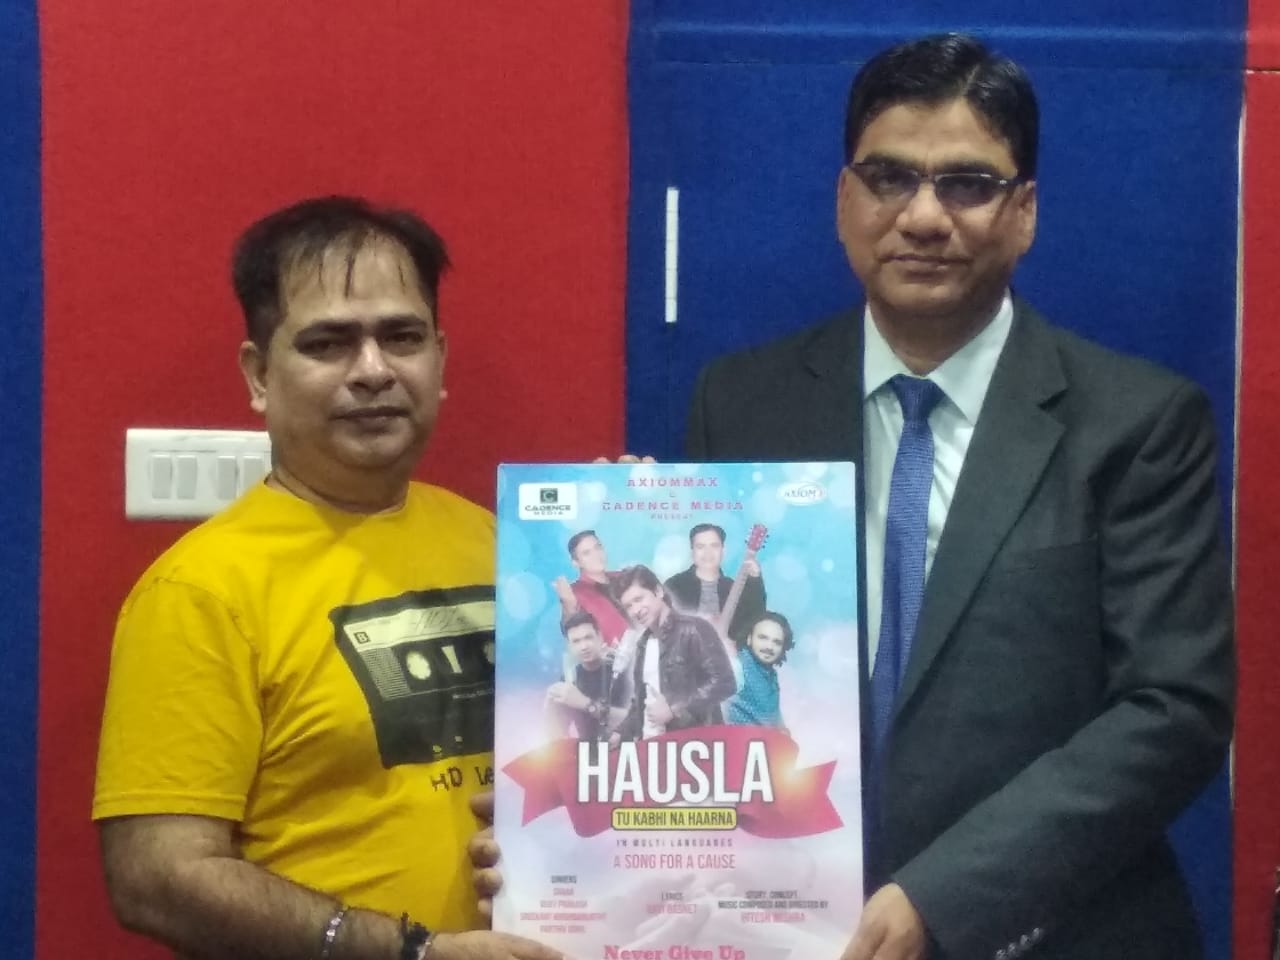 Axiommax Oncology Ceo Mr Anil Kumar Goyal and Music composer and Director Mr Hitesh Mishra of Cadence media Launched Music Album Hausala-A song for cancer patient and their family in Mumbai. 